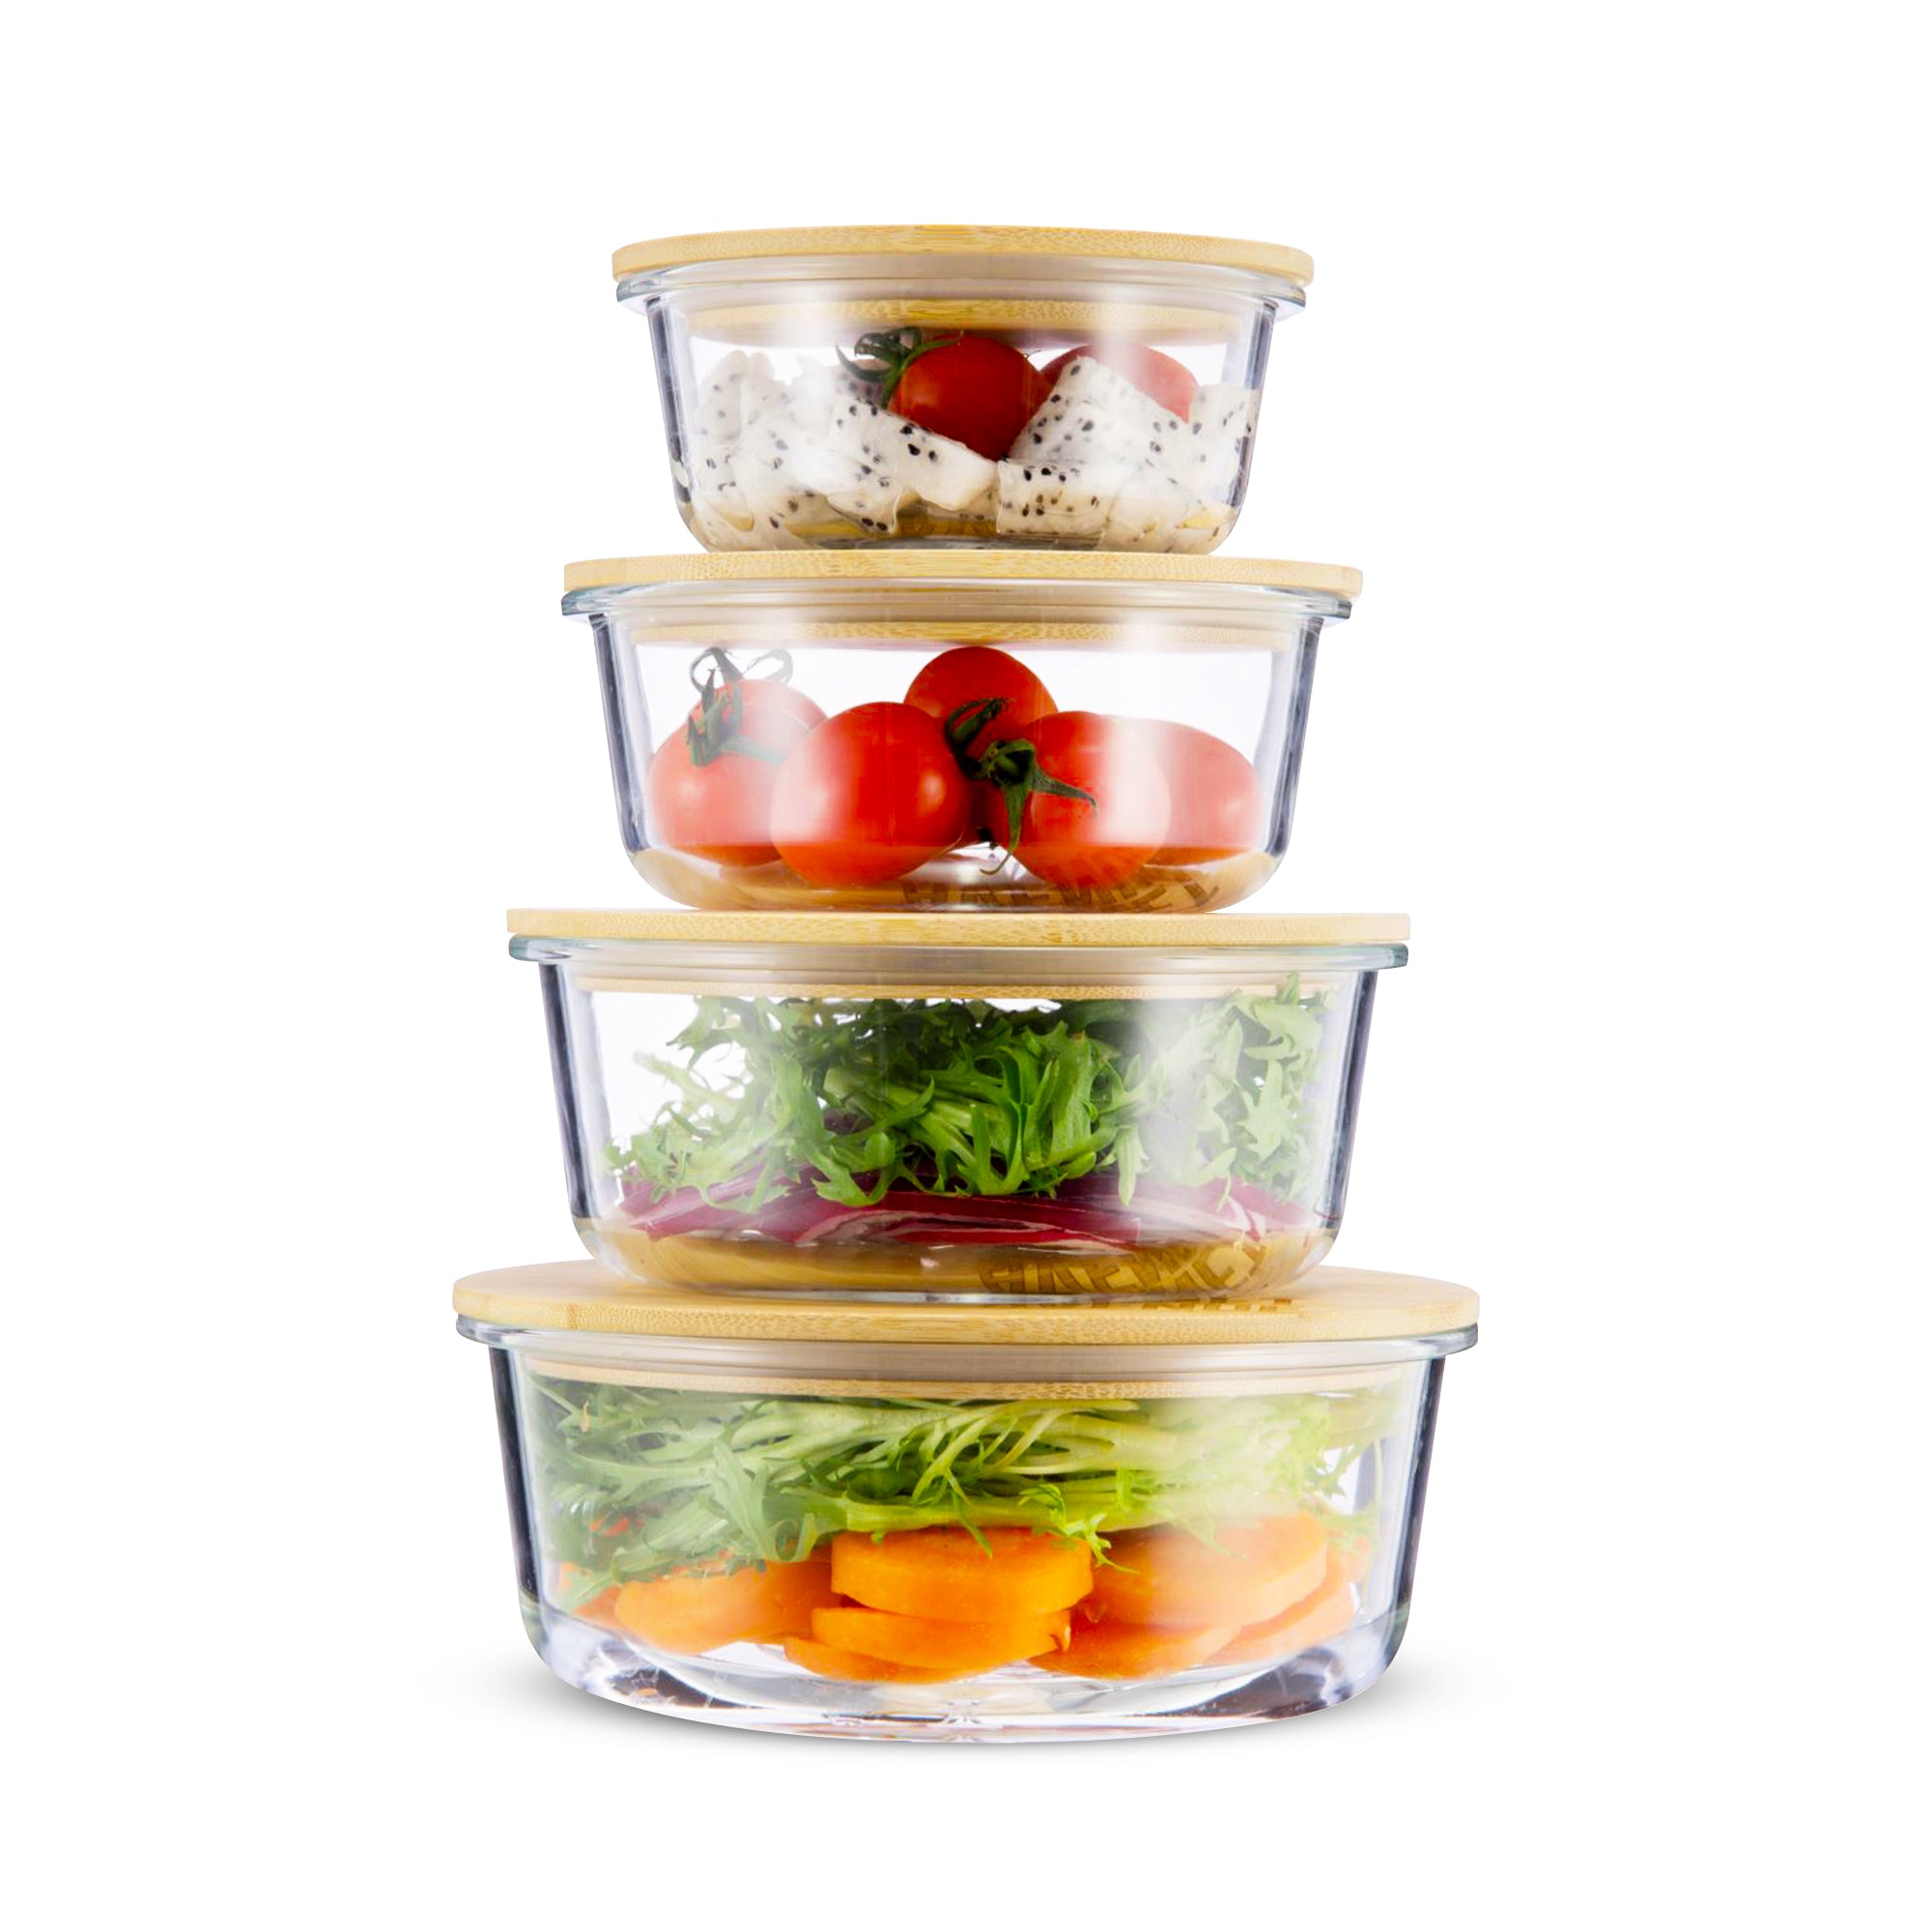 Glass Food Storage Containers with Lids (Bamboo) - 4 Piece Value Set - The  Most Ecofriendly Glass Containers for Food Storage with Lids - Airtight